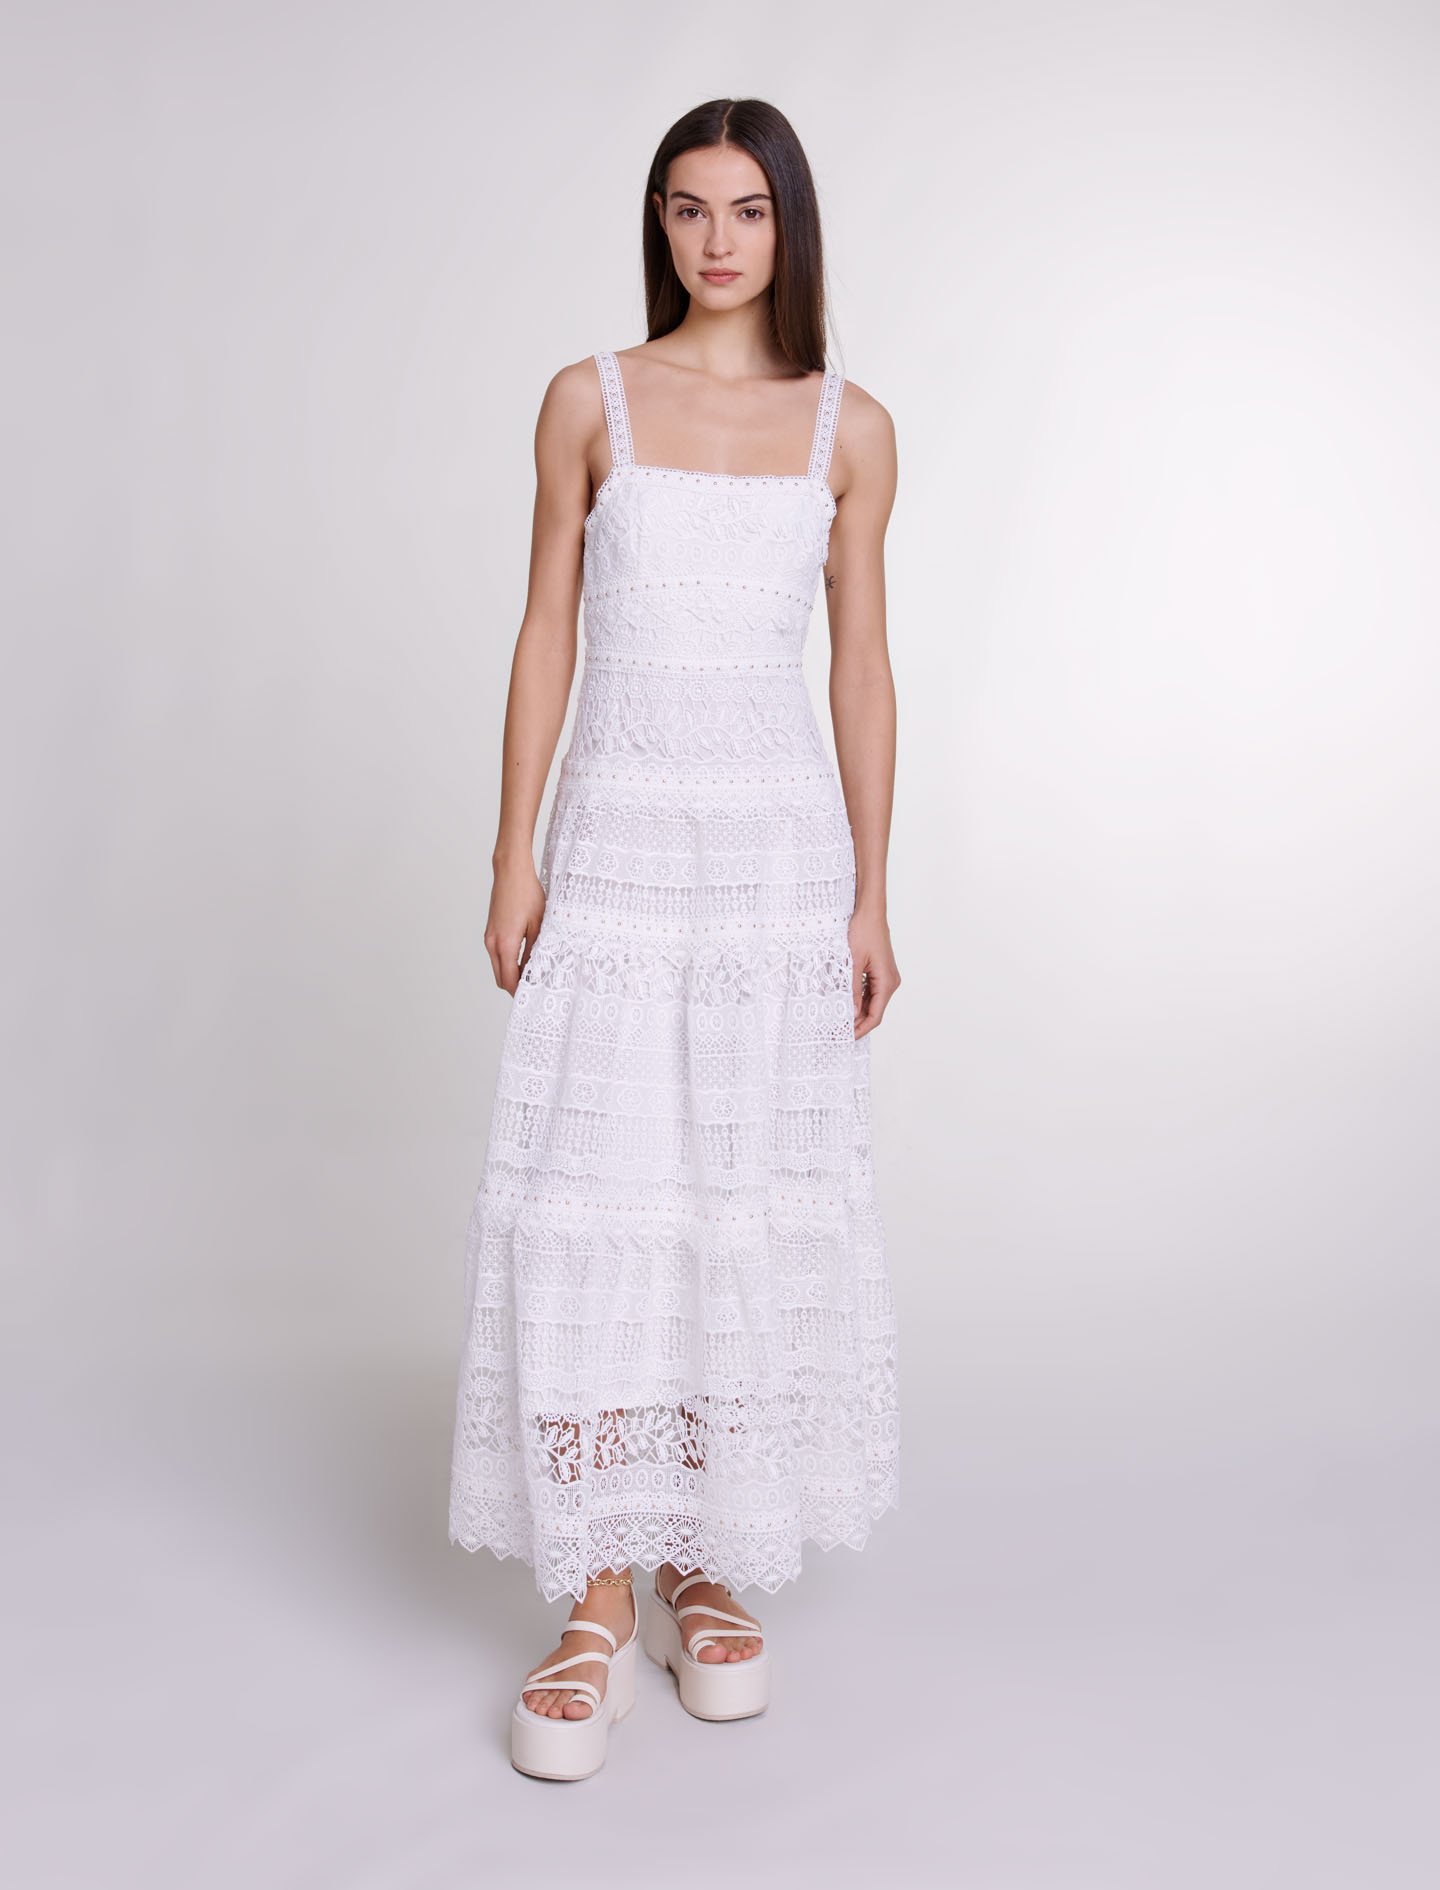 Maje Woman's polyester Lining: Crochet-knit maxi dress for Spring/Summer, in color White / White